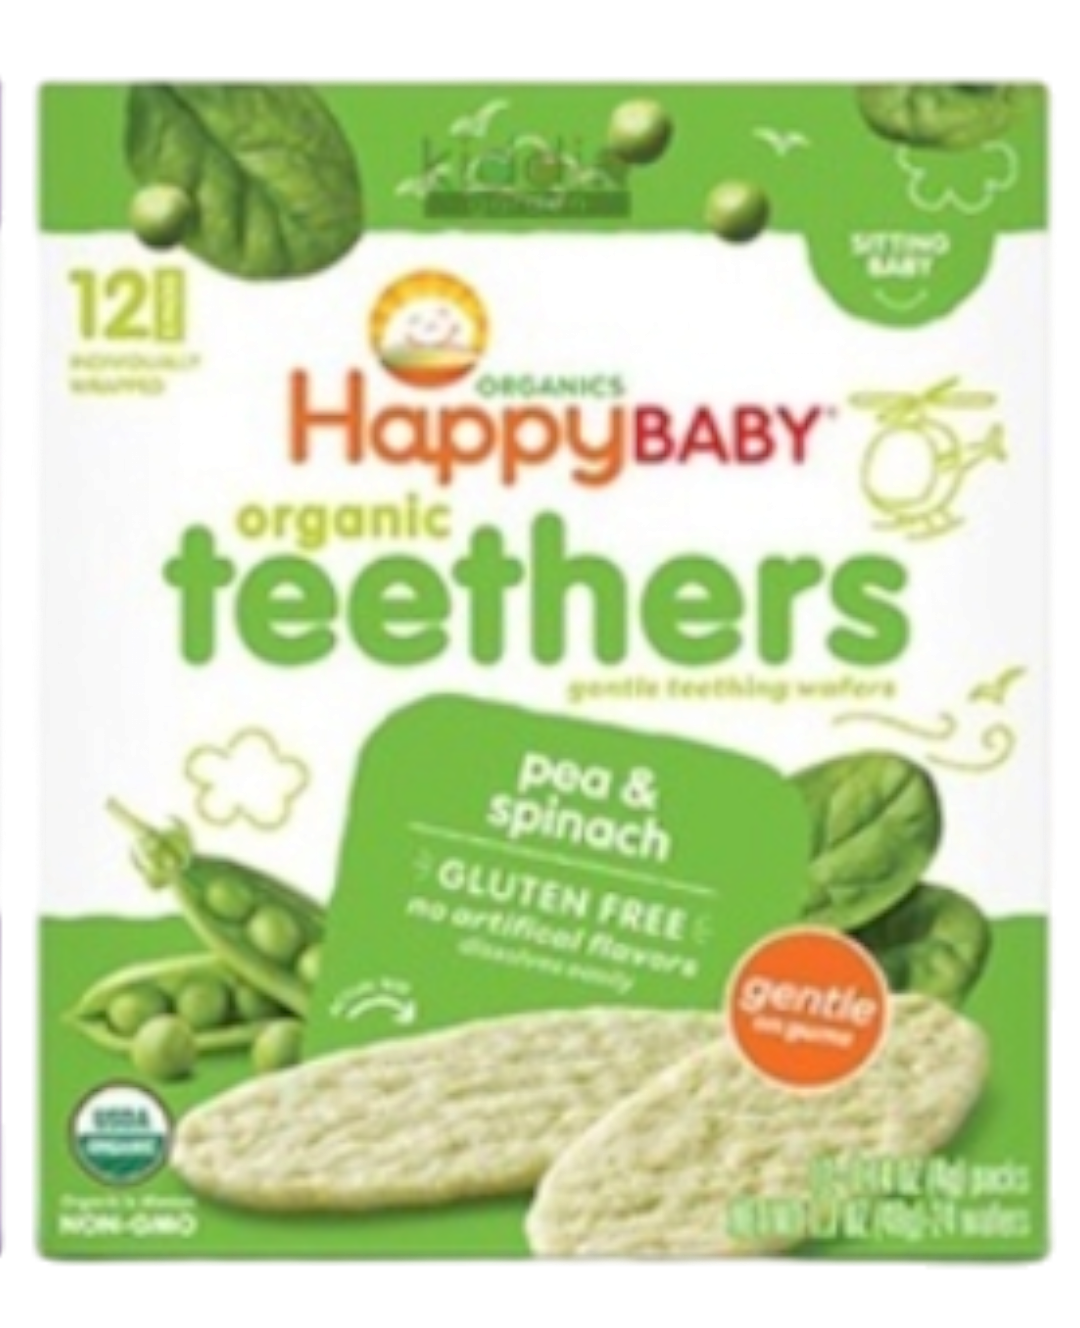 Happybaby Organic Teethers Pea & Spinach 48g